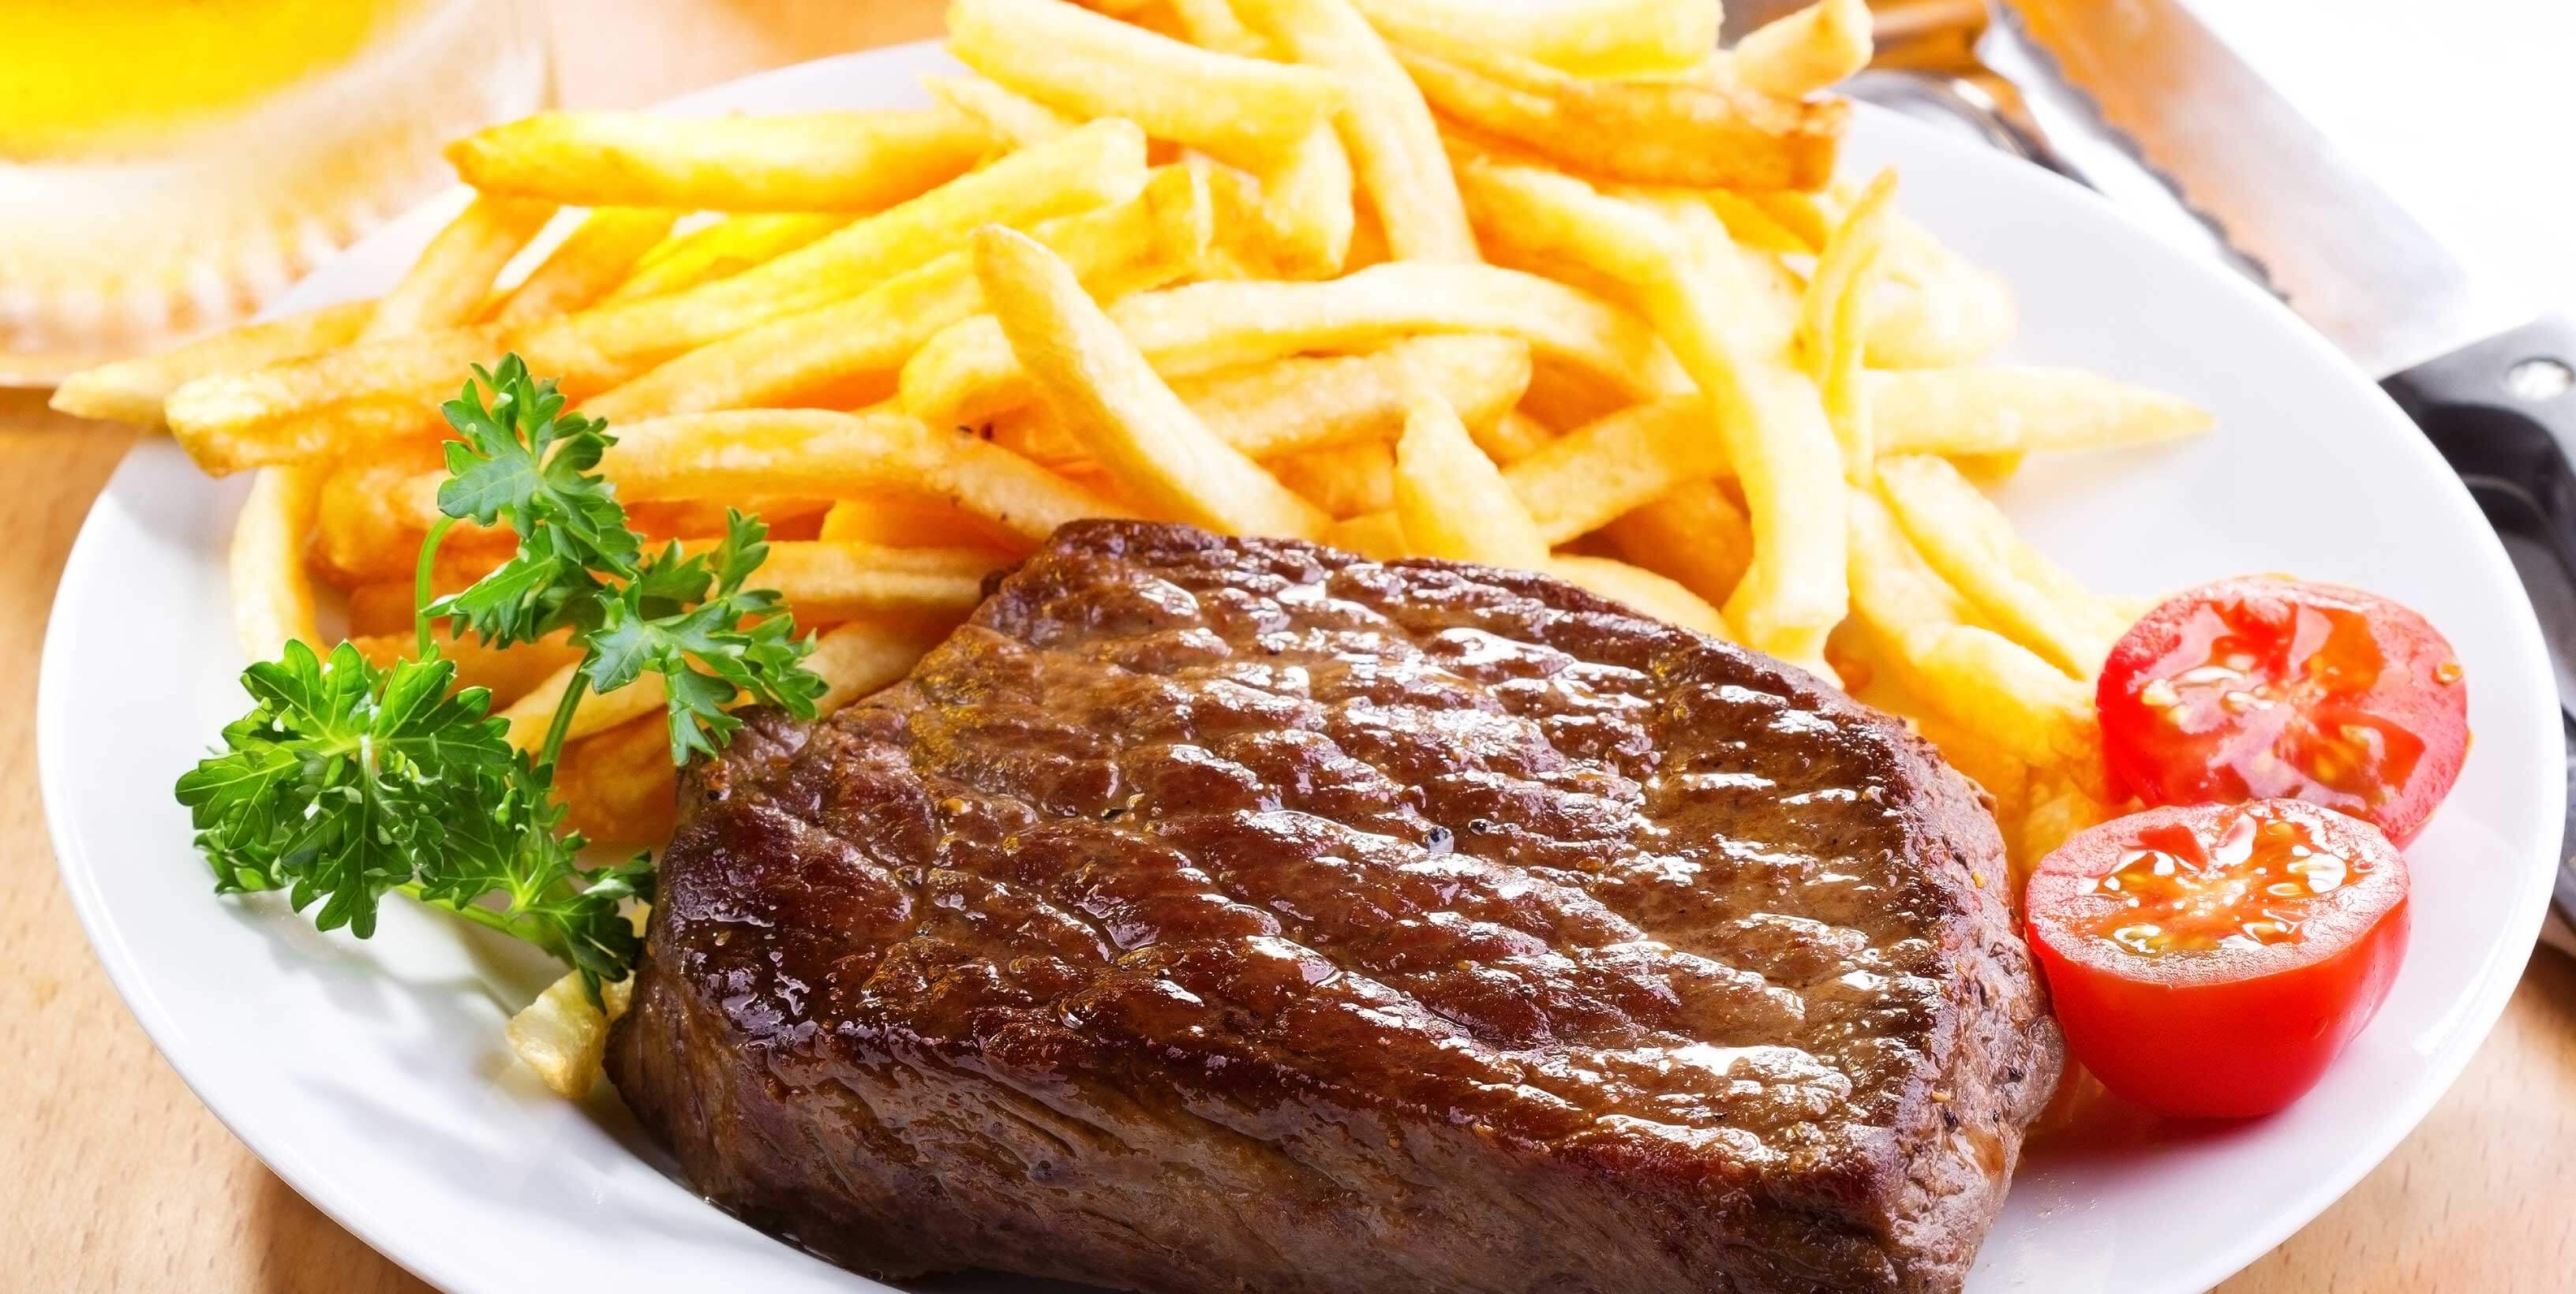 Plate of grilled steak and golden deep fried French Fries